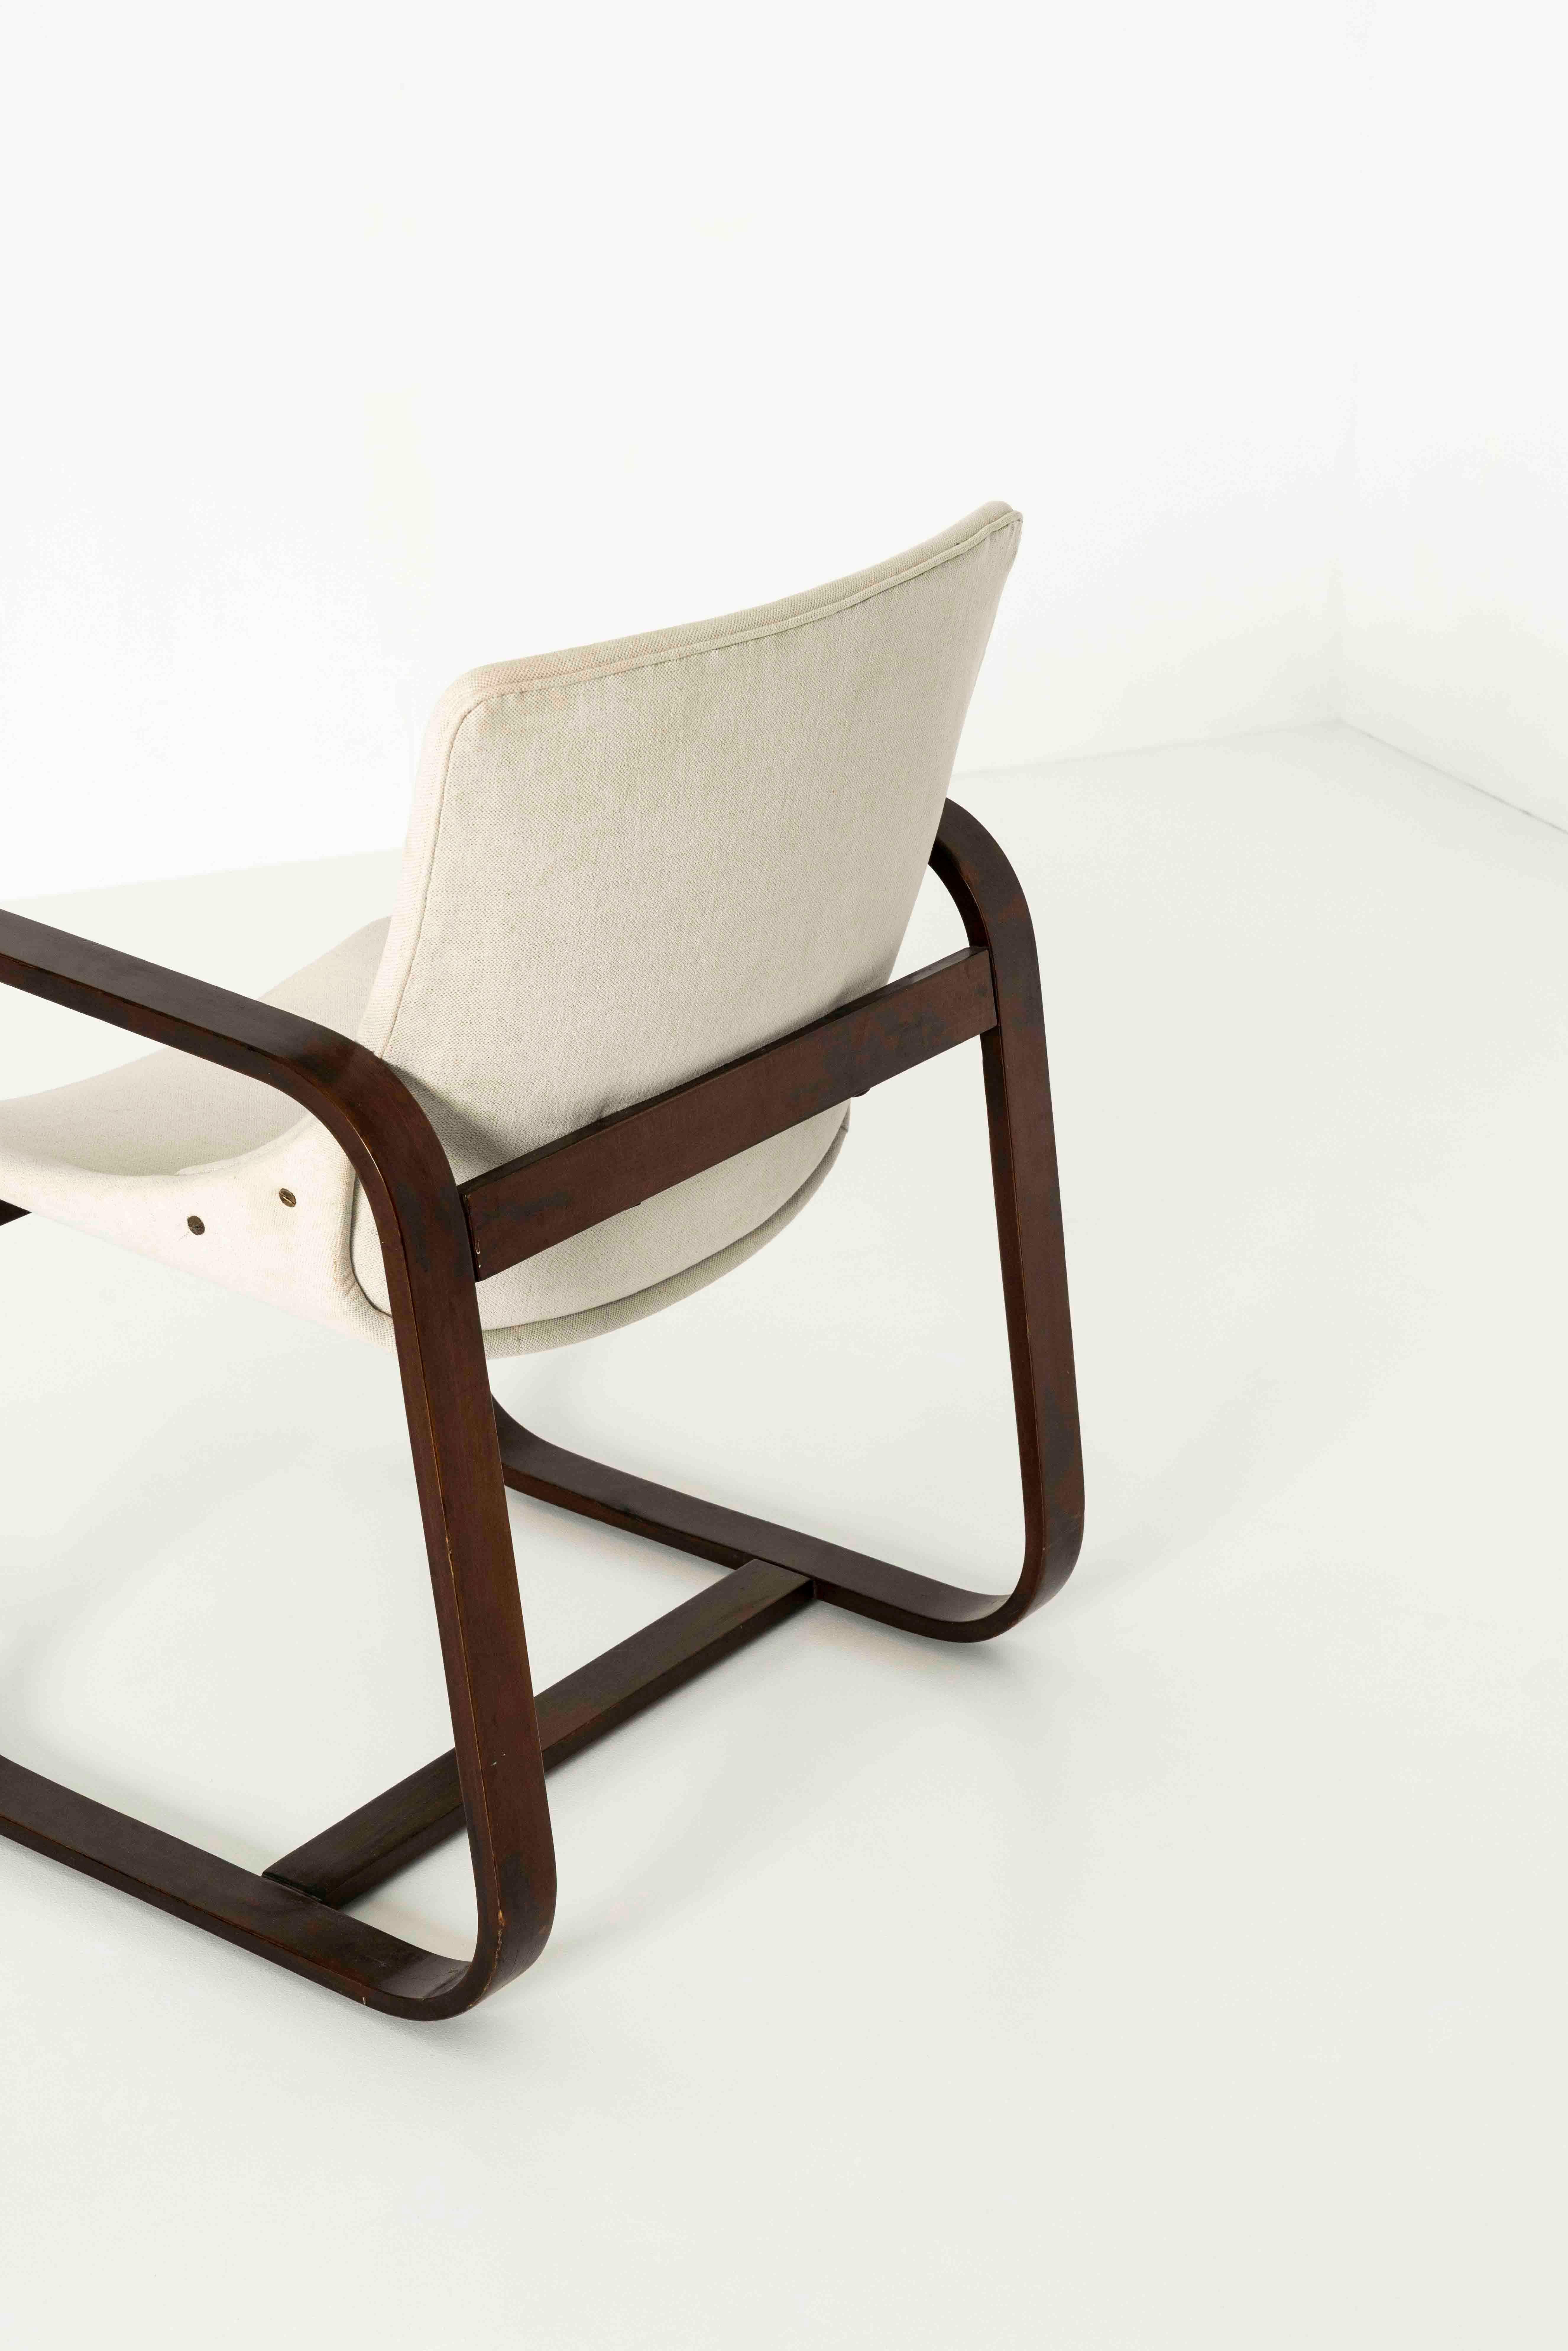 Arm Chair by Giuseppe Pagano Pogatschnig and Gino Maggioni, Italy 1940s For Sale 2